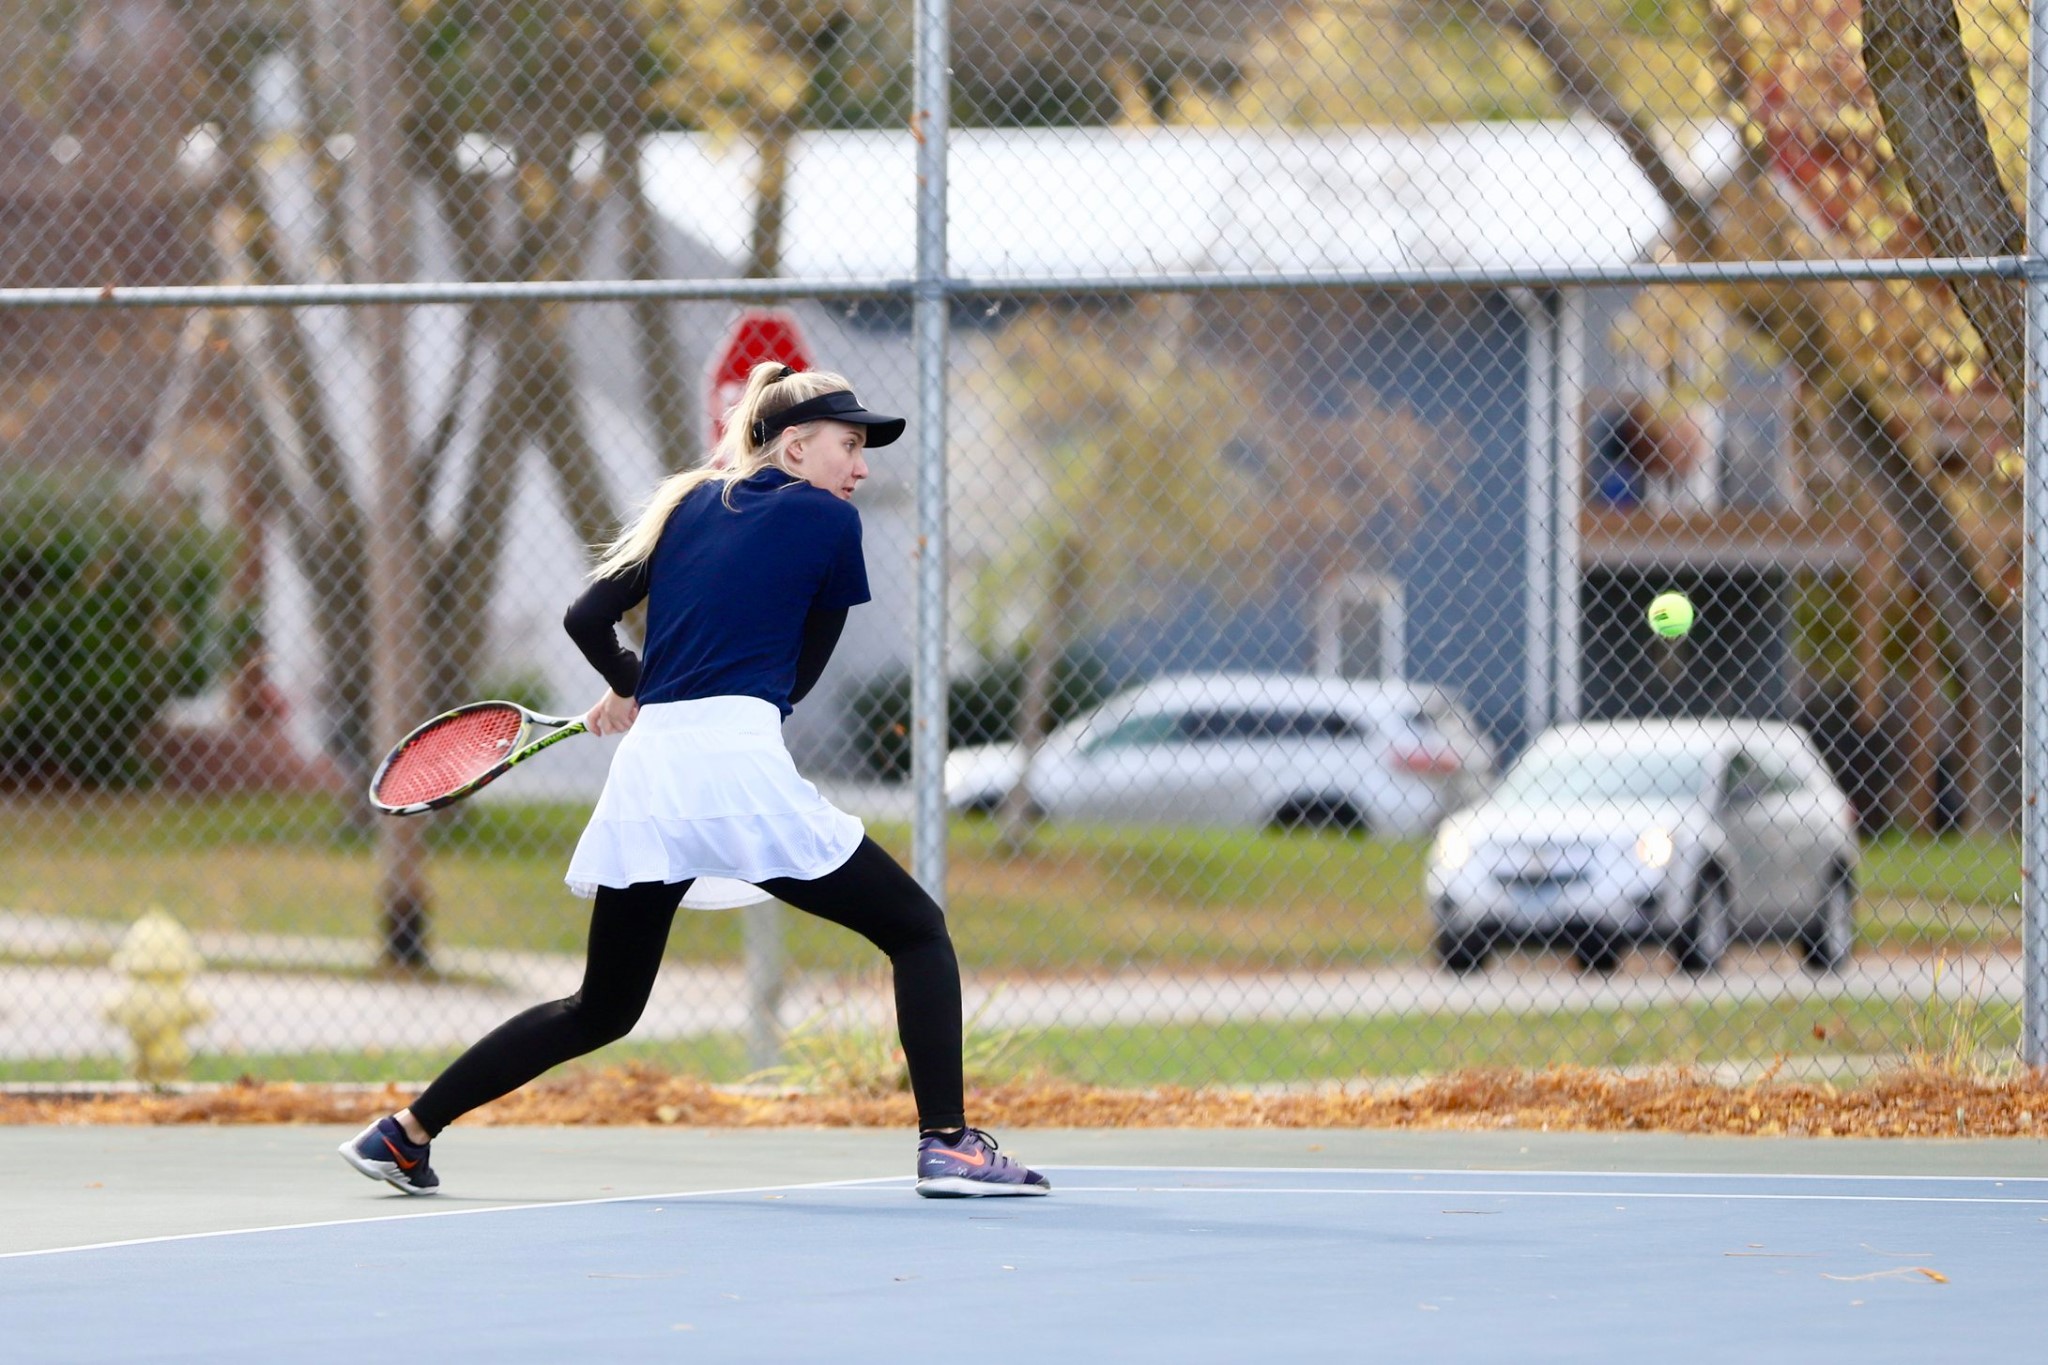 Beladova finishes fall with two wins